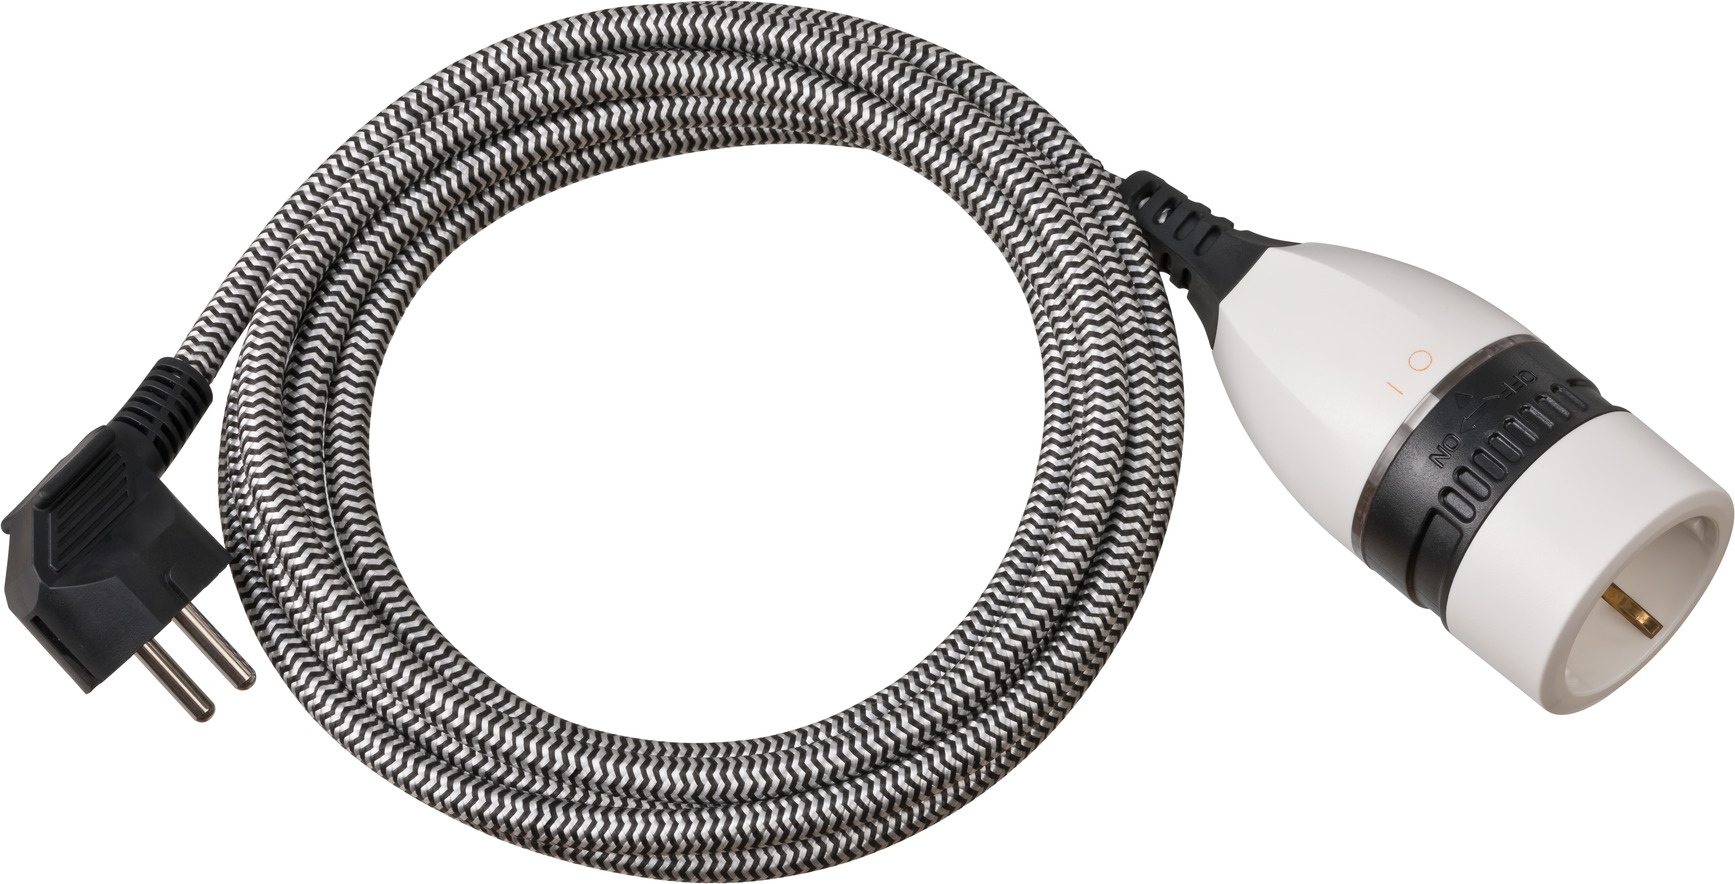 Quality plastic extension cable 3m H05VV-F 3G1.5 white with a flat plug and  double coupling